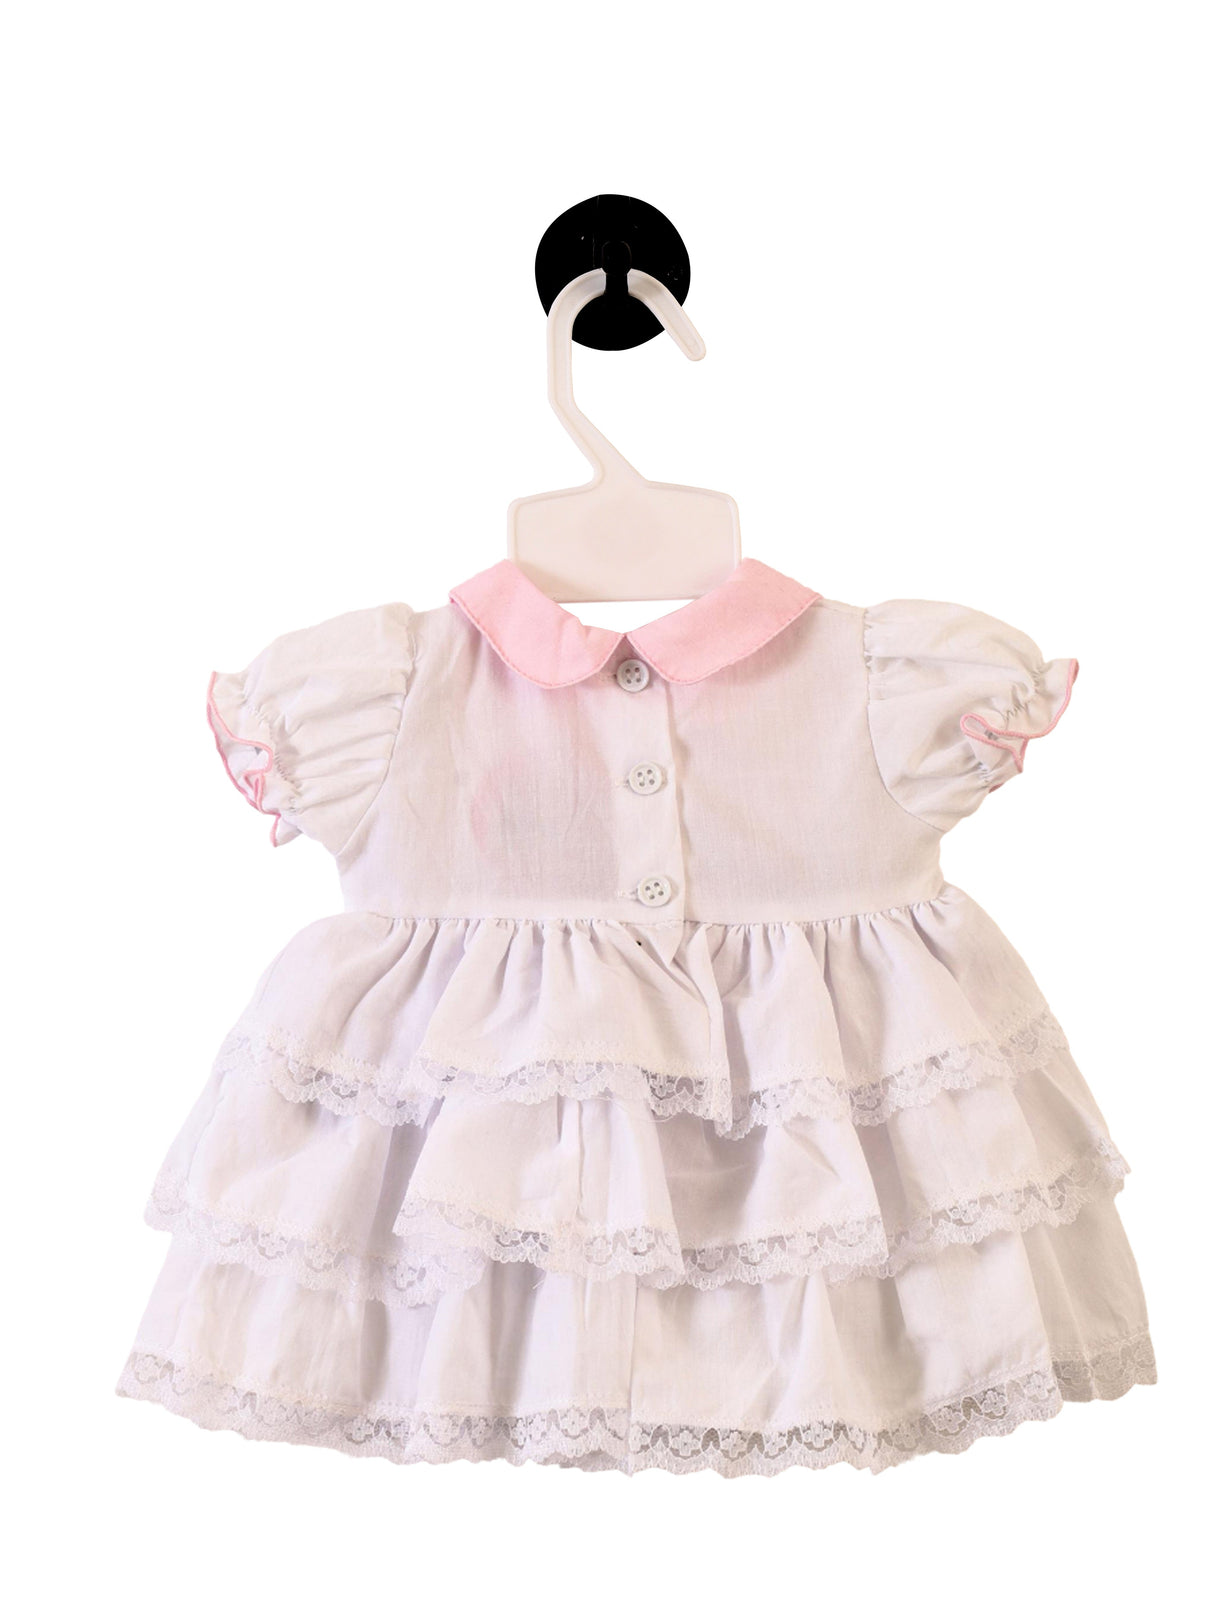 Imp Girtls Cotton Frock With Hair Band #22022A (S-22)